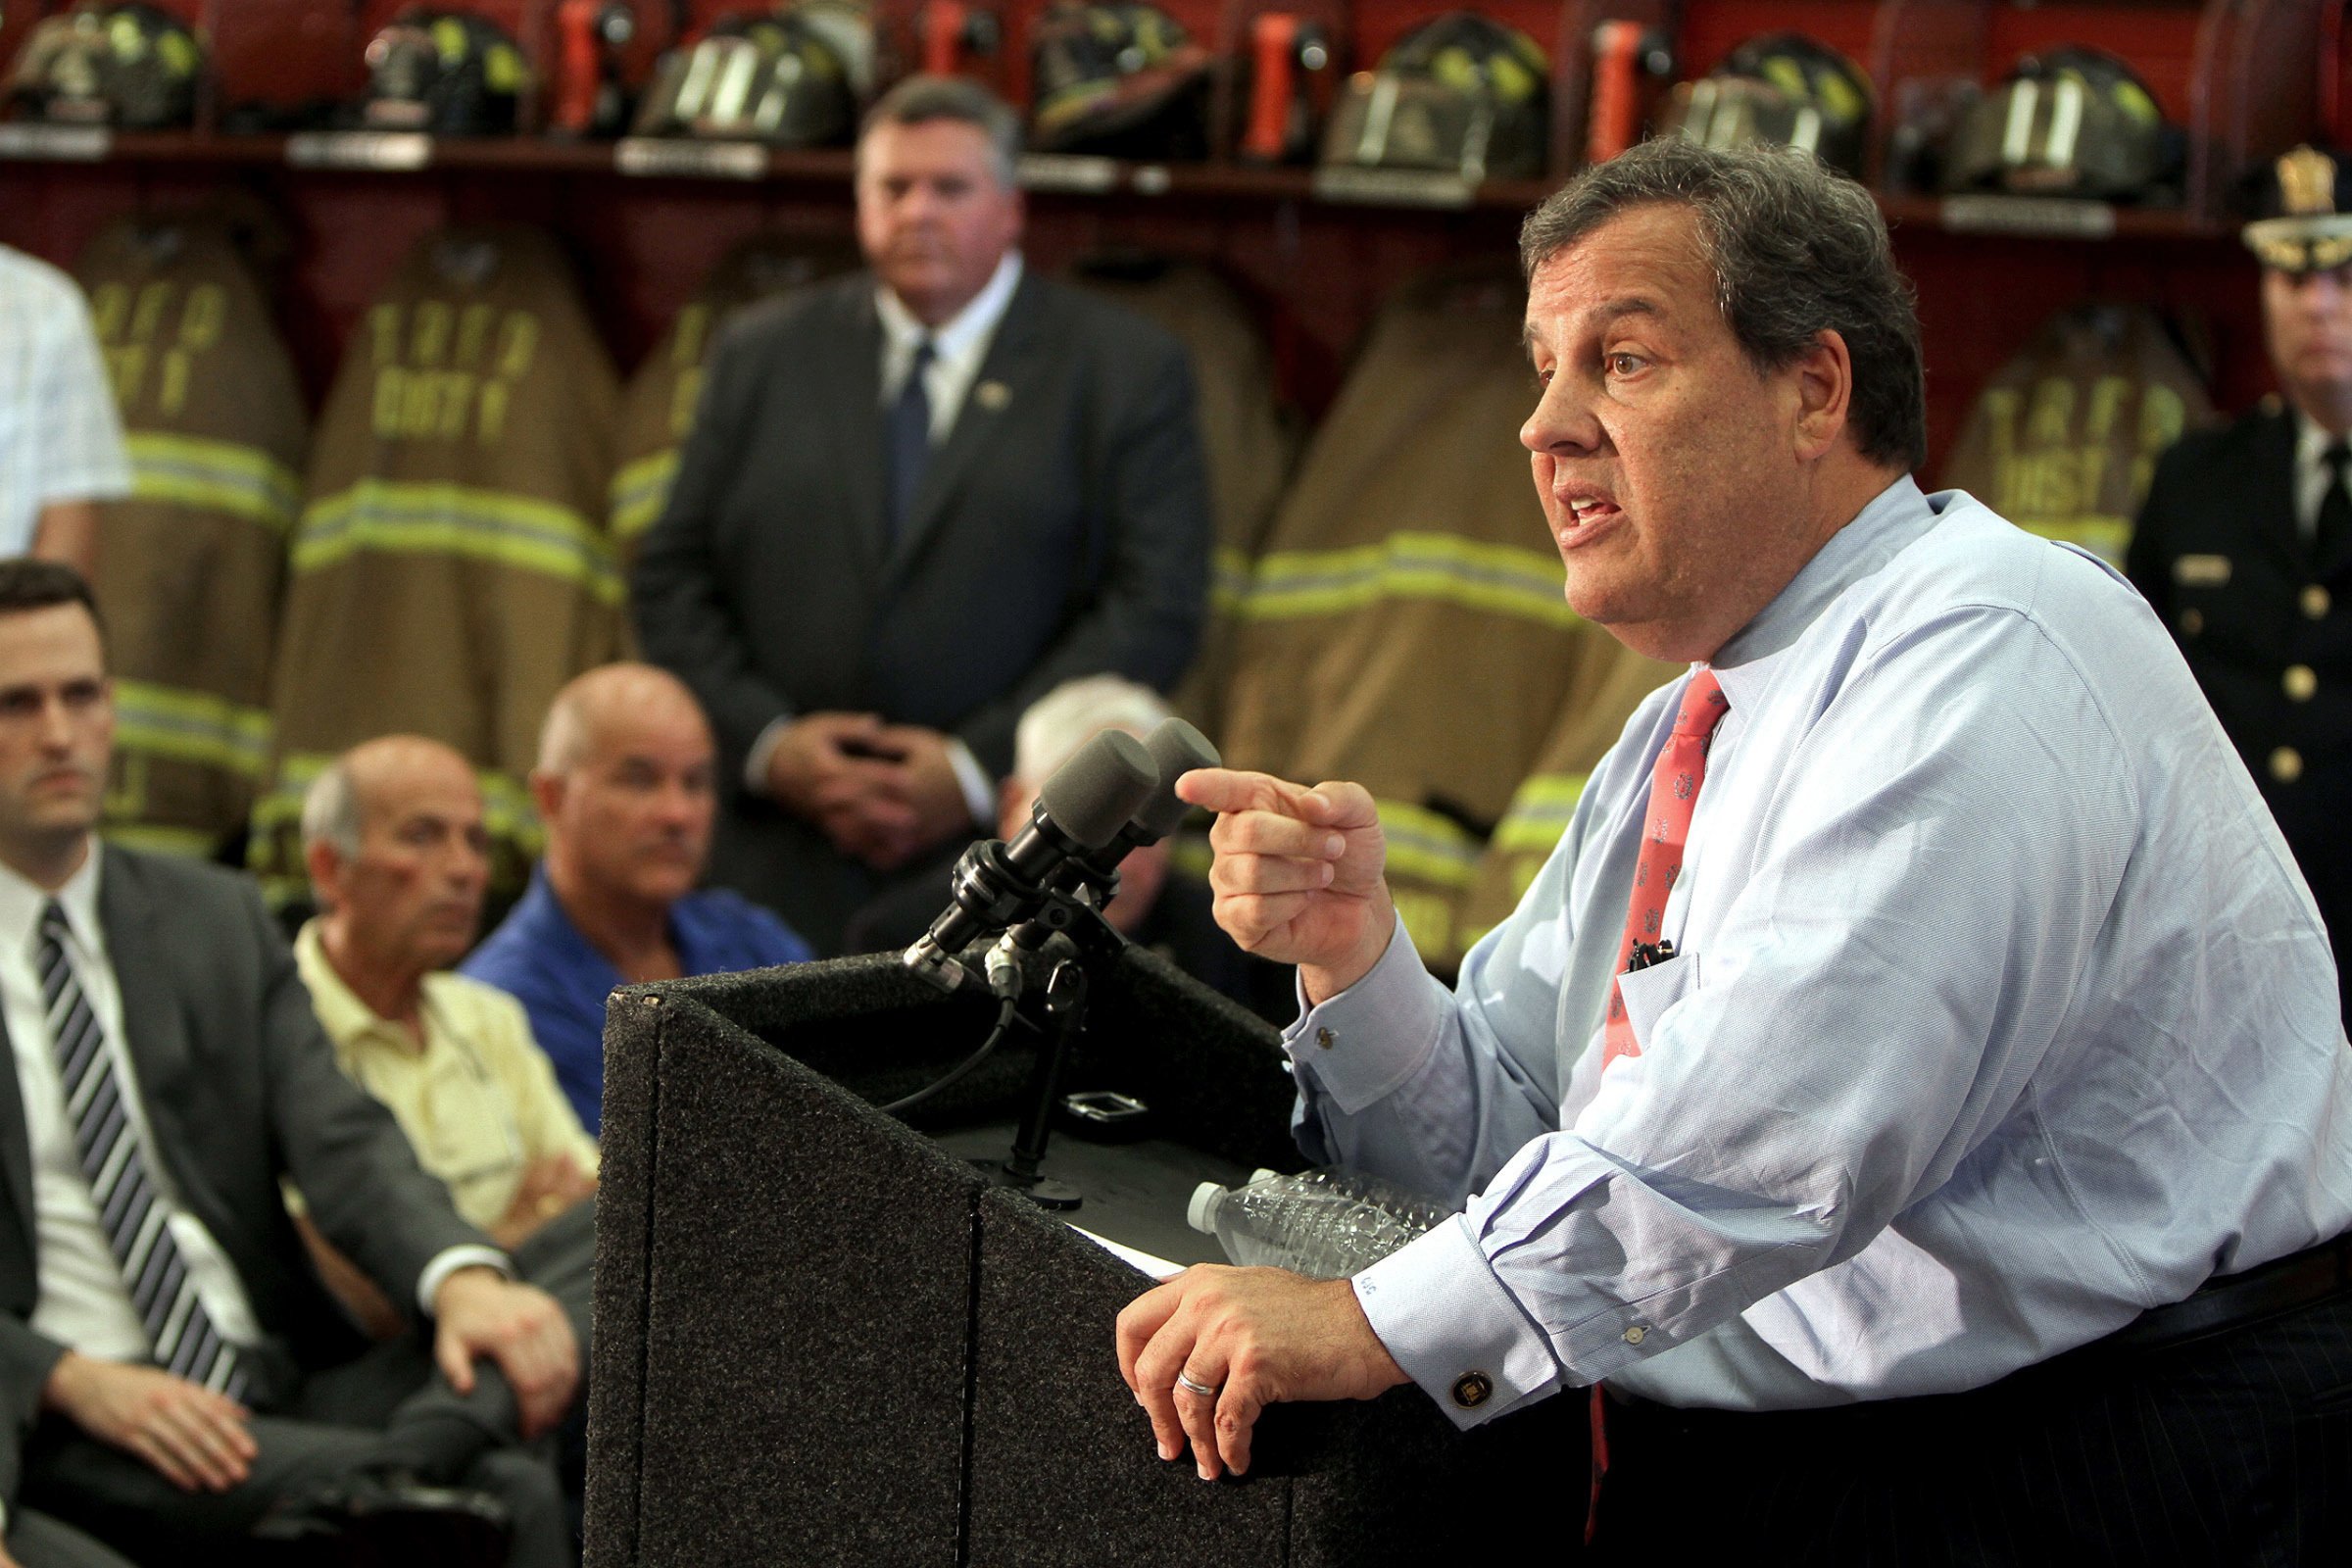 New Jersey Gov. Chris Christie speaks at the East Dover Firehouse in Toms River, N.J, Friday, Aug. 26, 2016. He announced the availability of additional federal disaster aid for superstorm Sandy recovery that is expected to benefit the township's municipal government and regional school district. (Thomas P. Costello /The Asbury Park Press via AP)